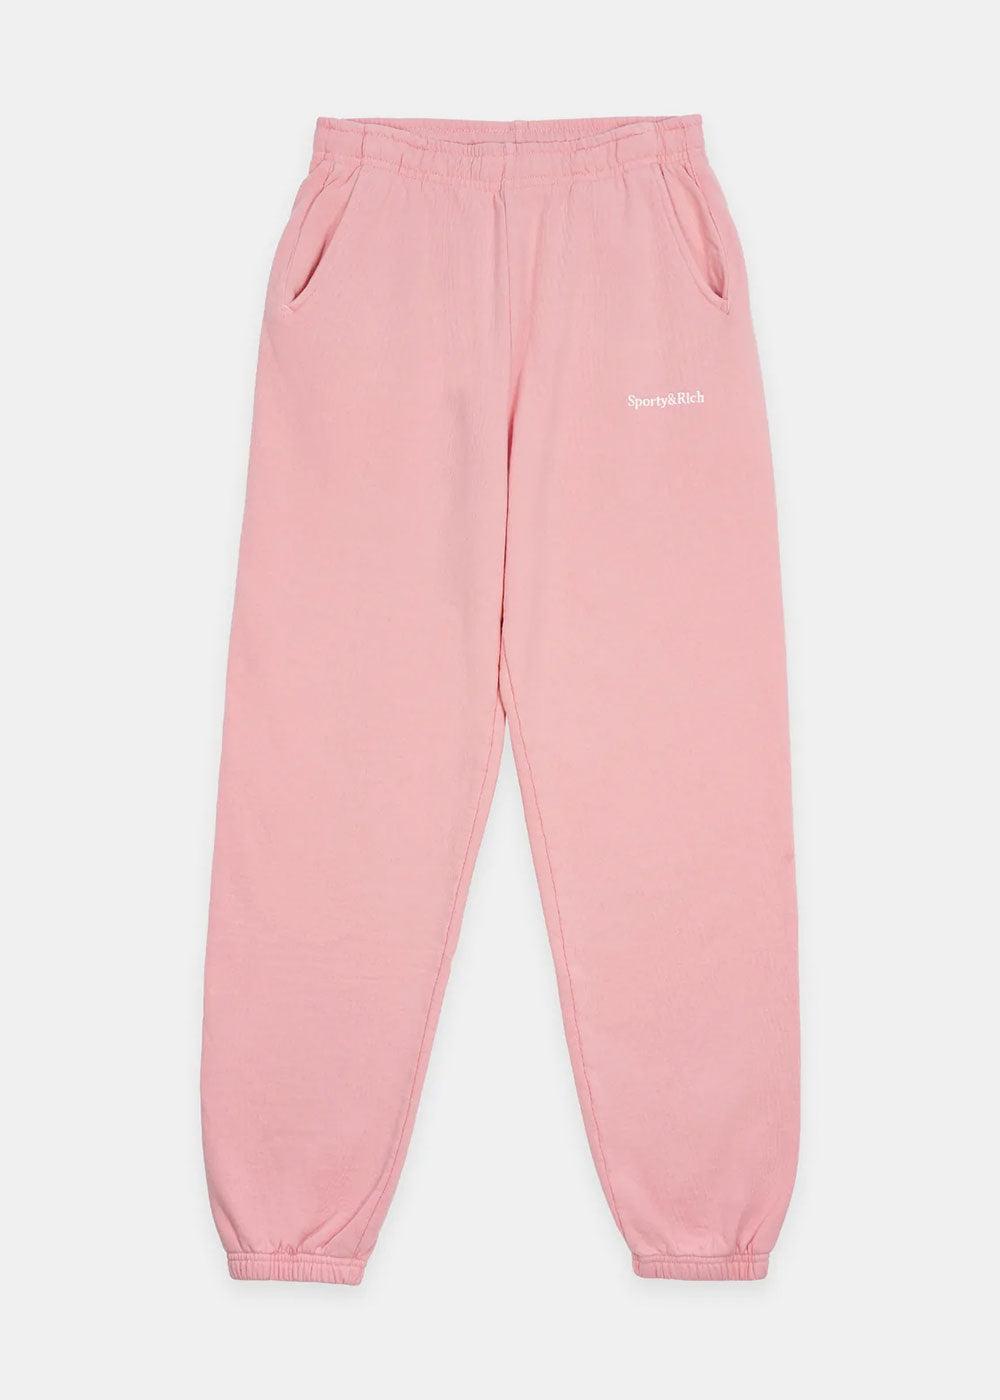 Sporty & Rich Rose Serif Logo Embroidered Sweatpants in Pink | Lyst